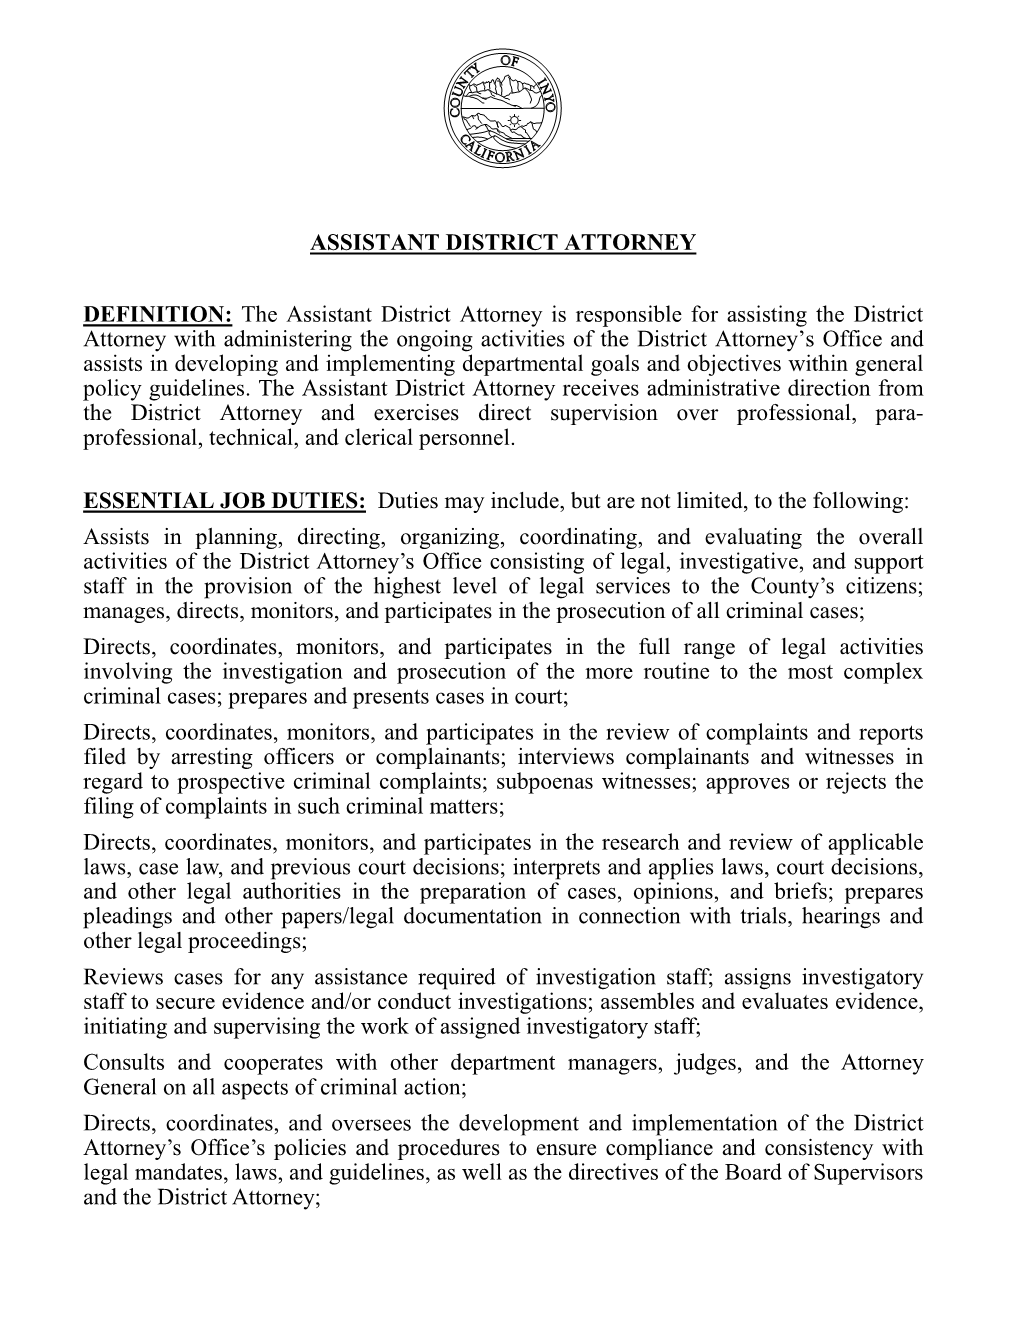 Assistant District Attorney Definition